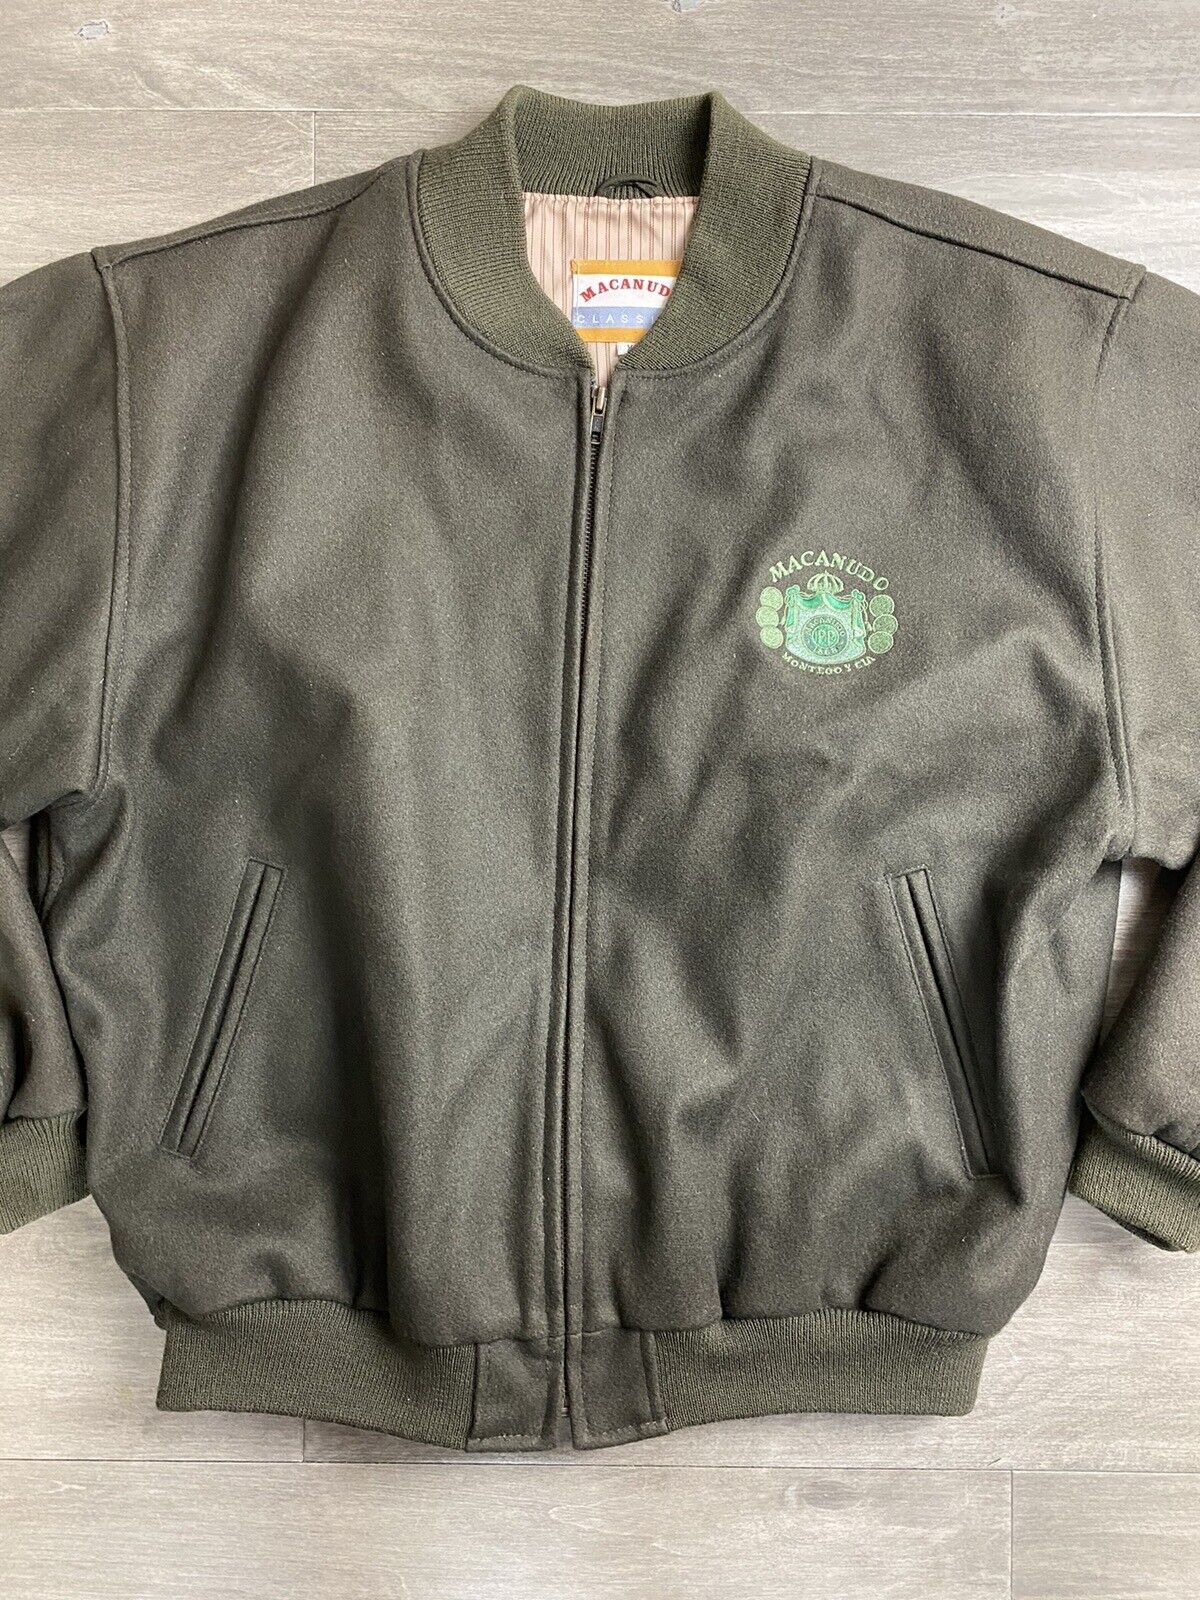 Macanudo wool Men’s Size XL Bomber Lined Vintage Green